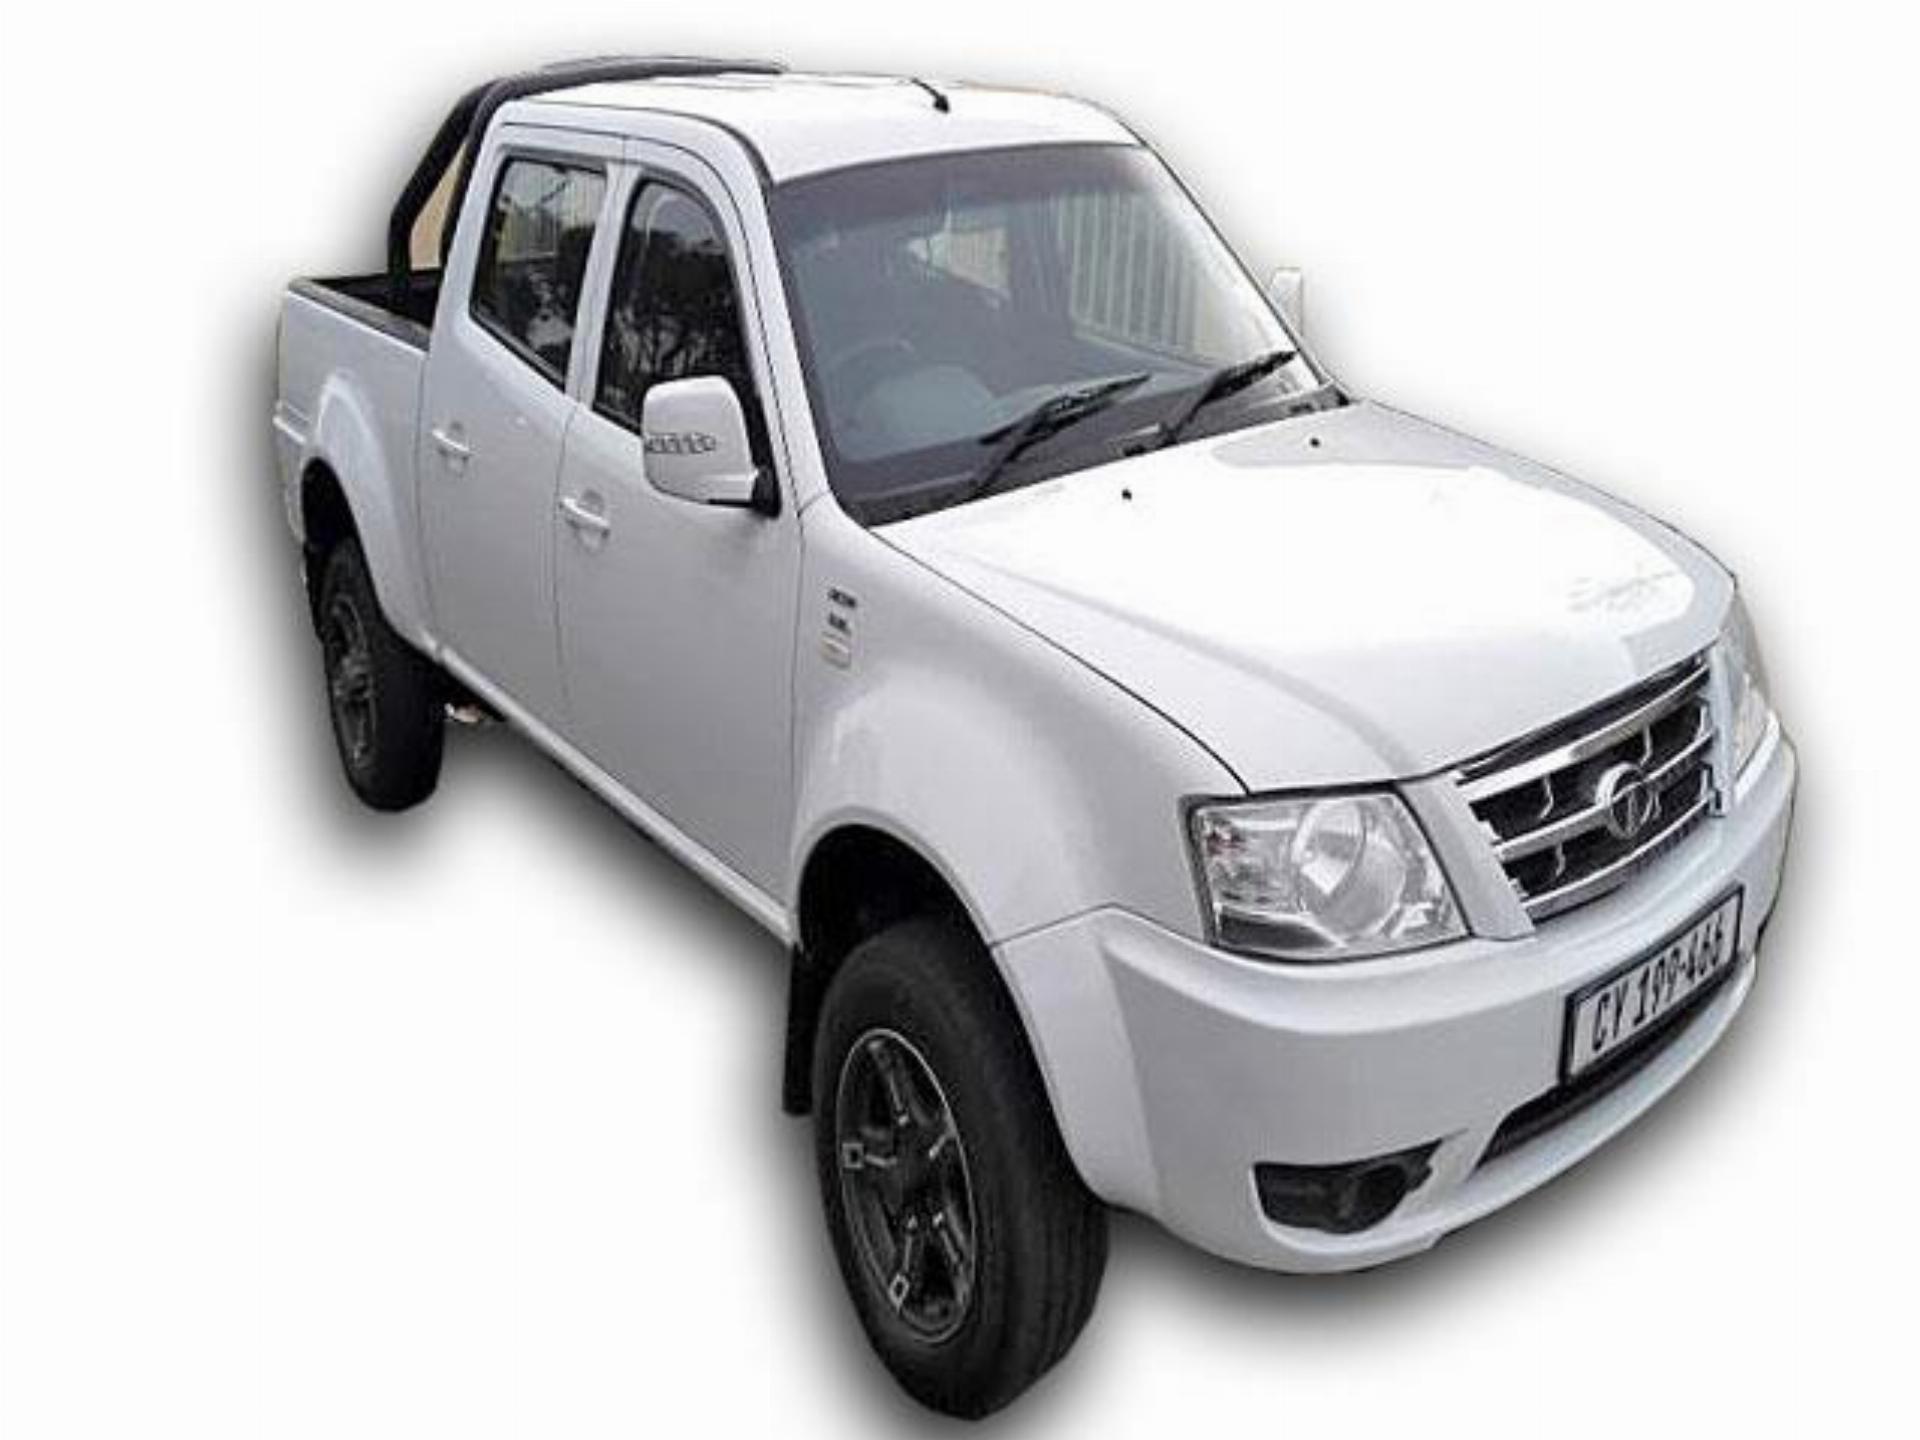 Tata Xenon 2.2 Dle 4X4 Yours For R110000